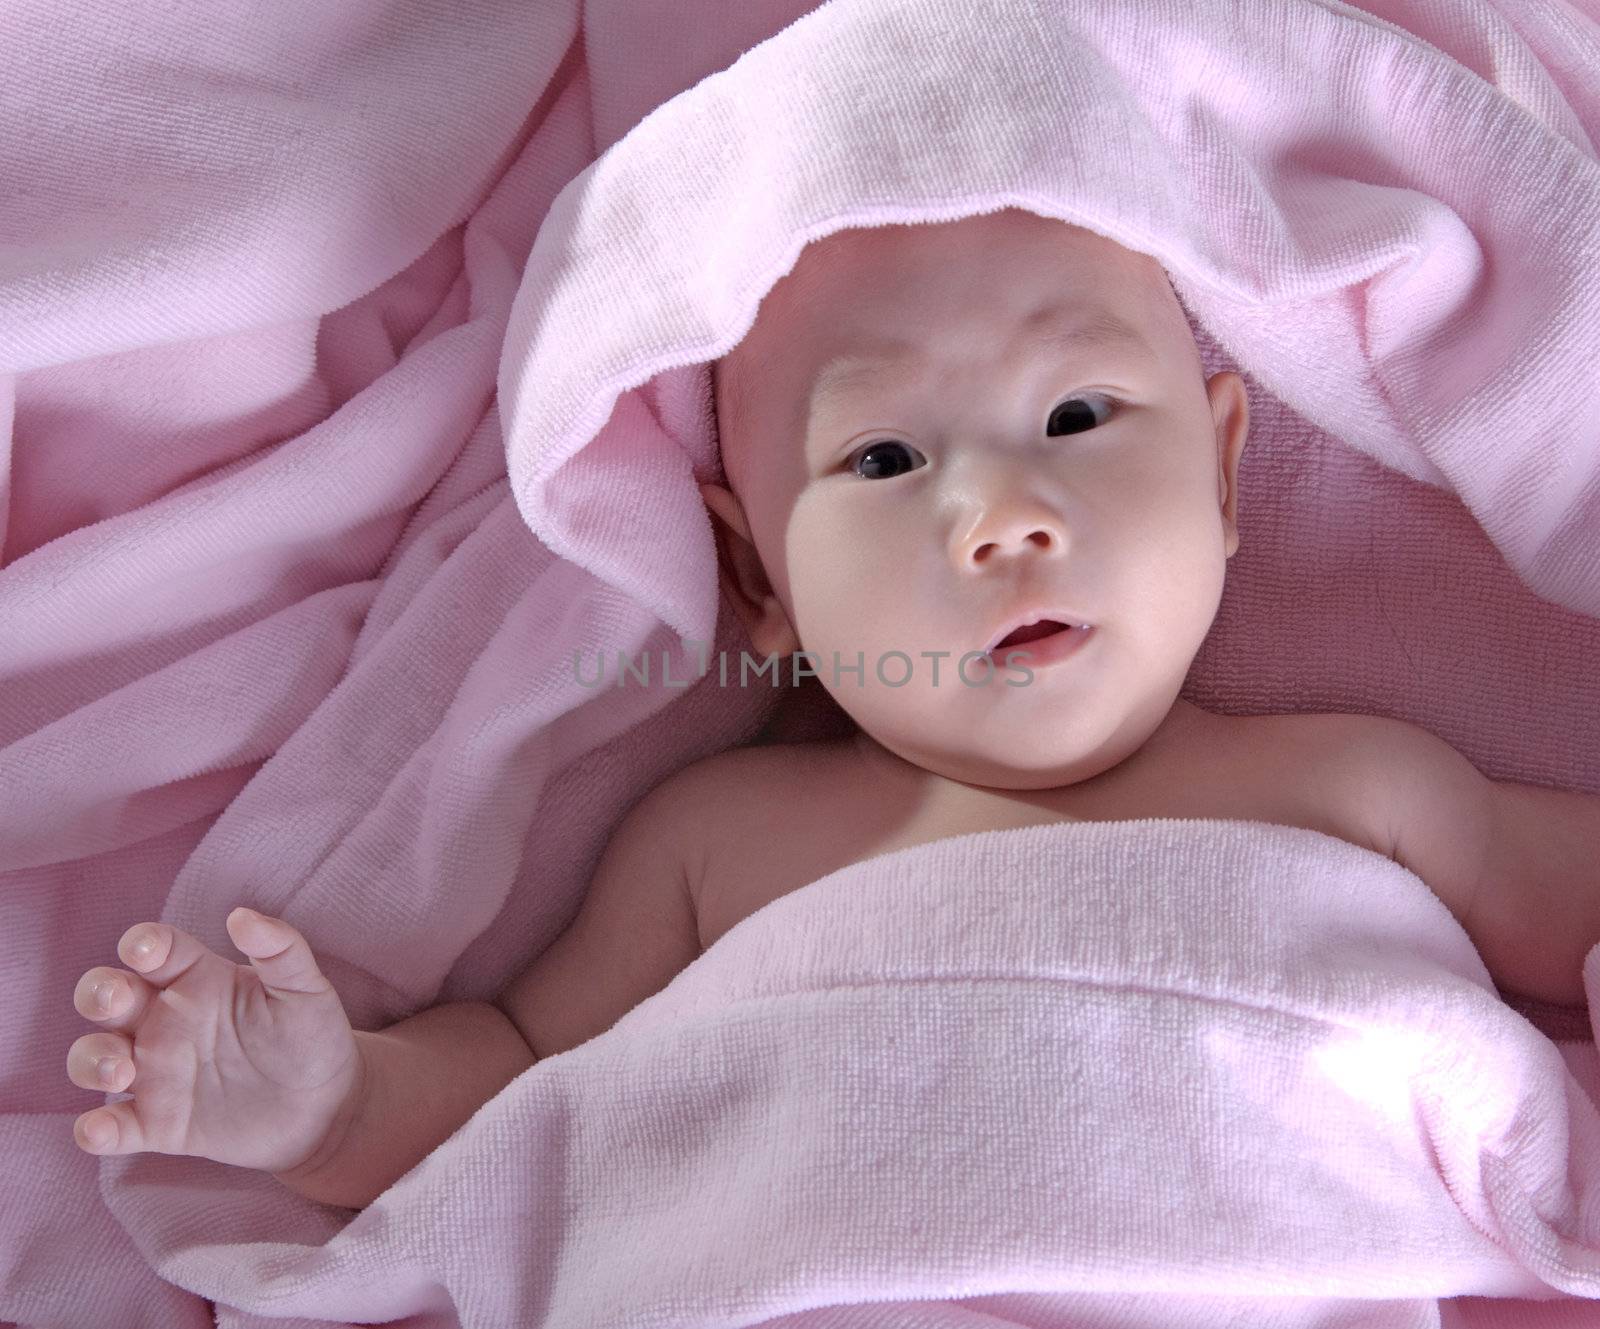 Baby after bath. Cheerful child.